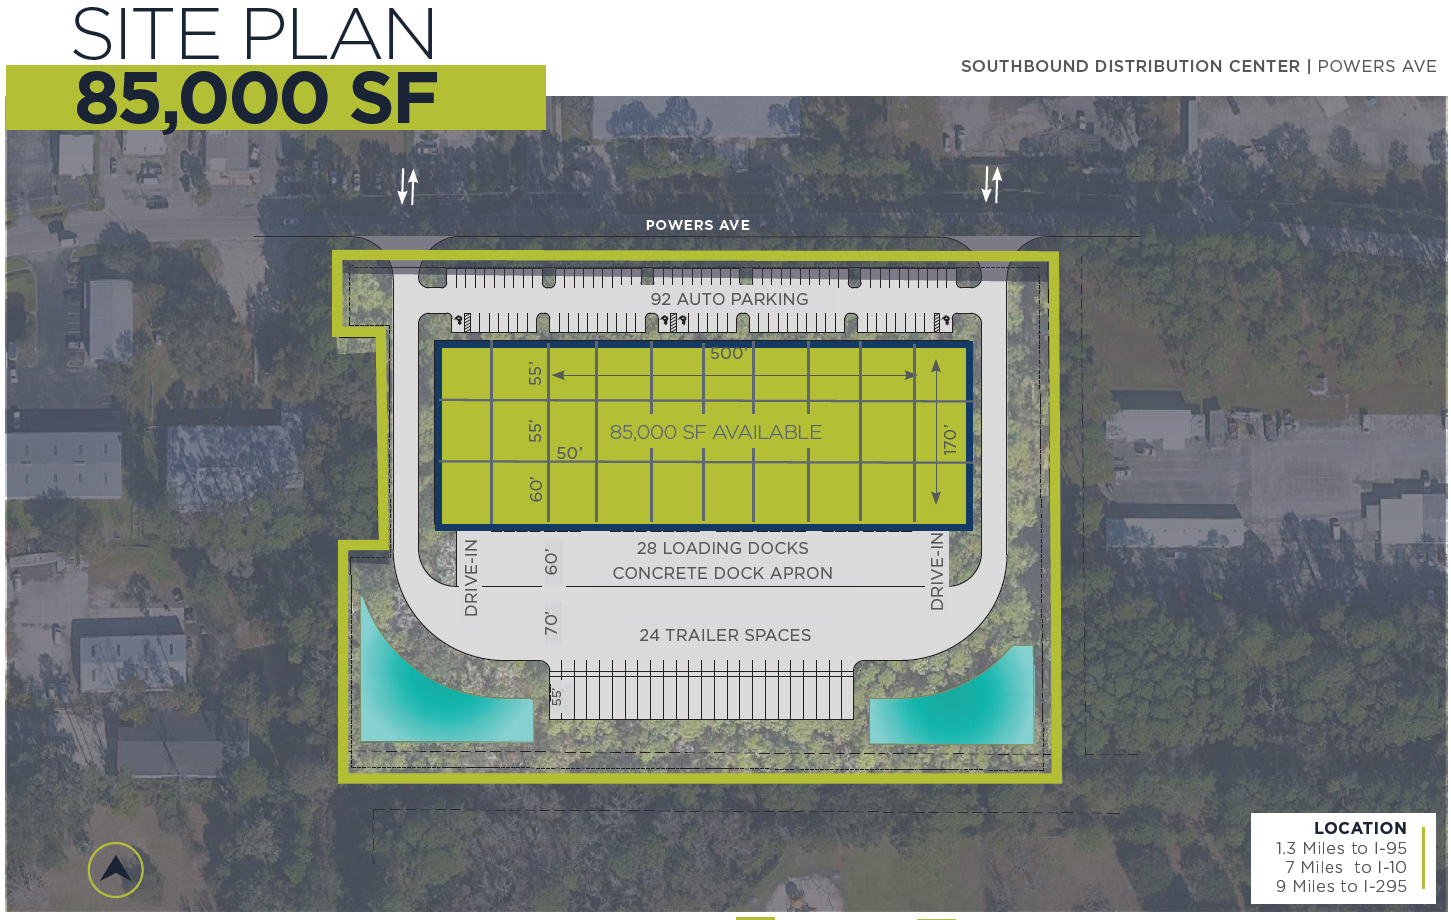 The site plan for Southbound Distribution Center.